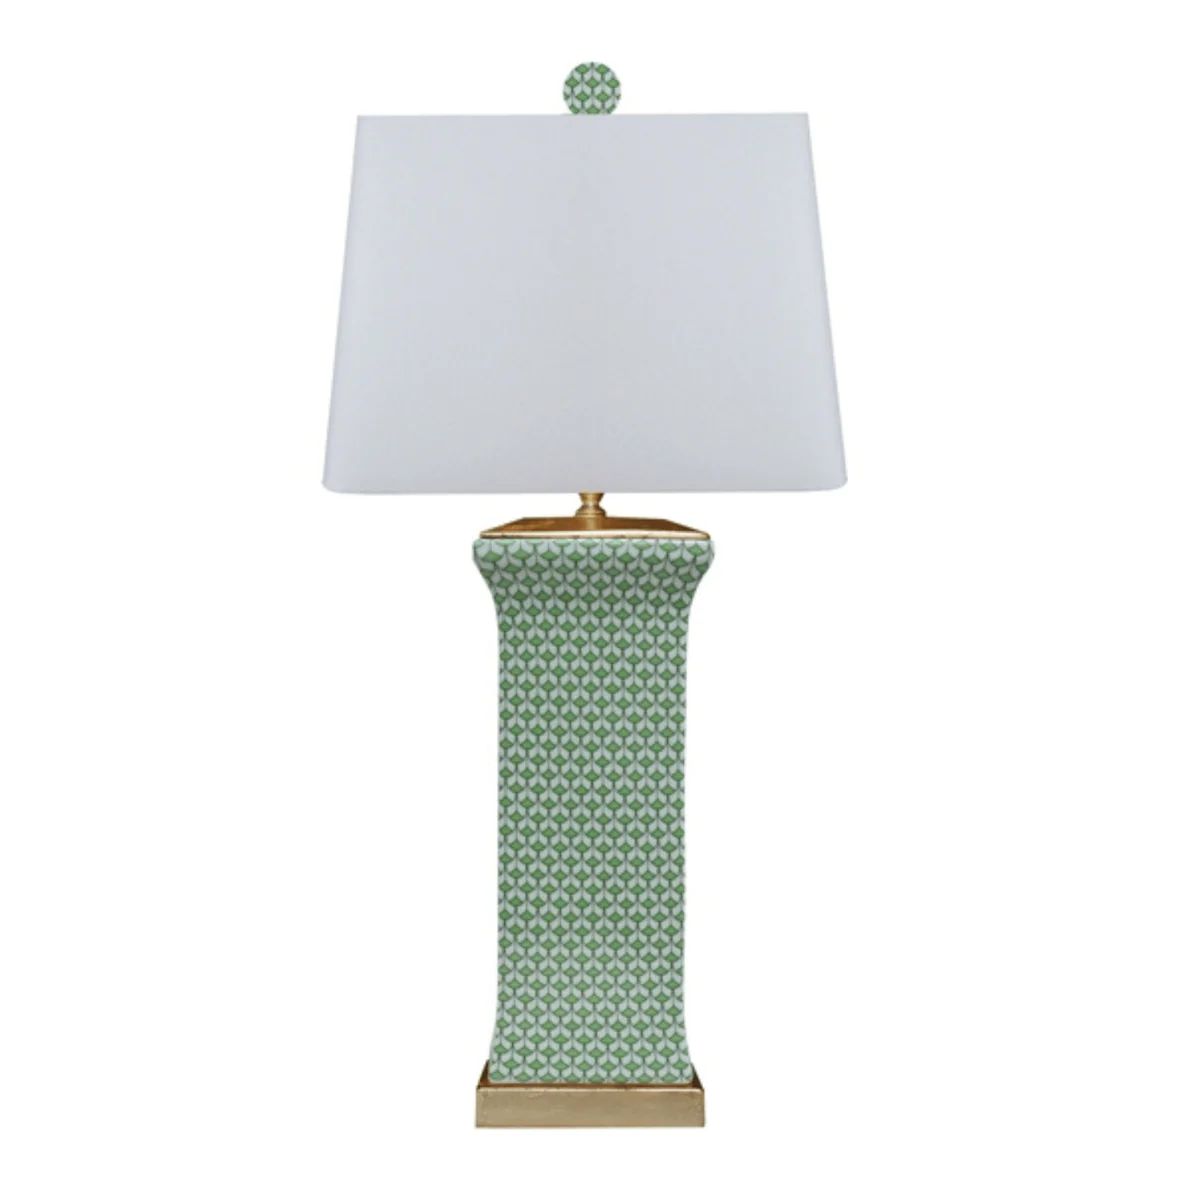 Porcelain Green Fish Scale Flat Vase Lamp With Gold Leaf Base | The Well Appointed House, LLC